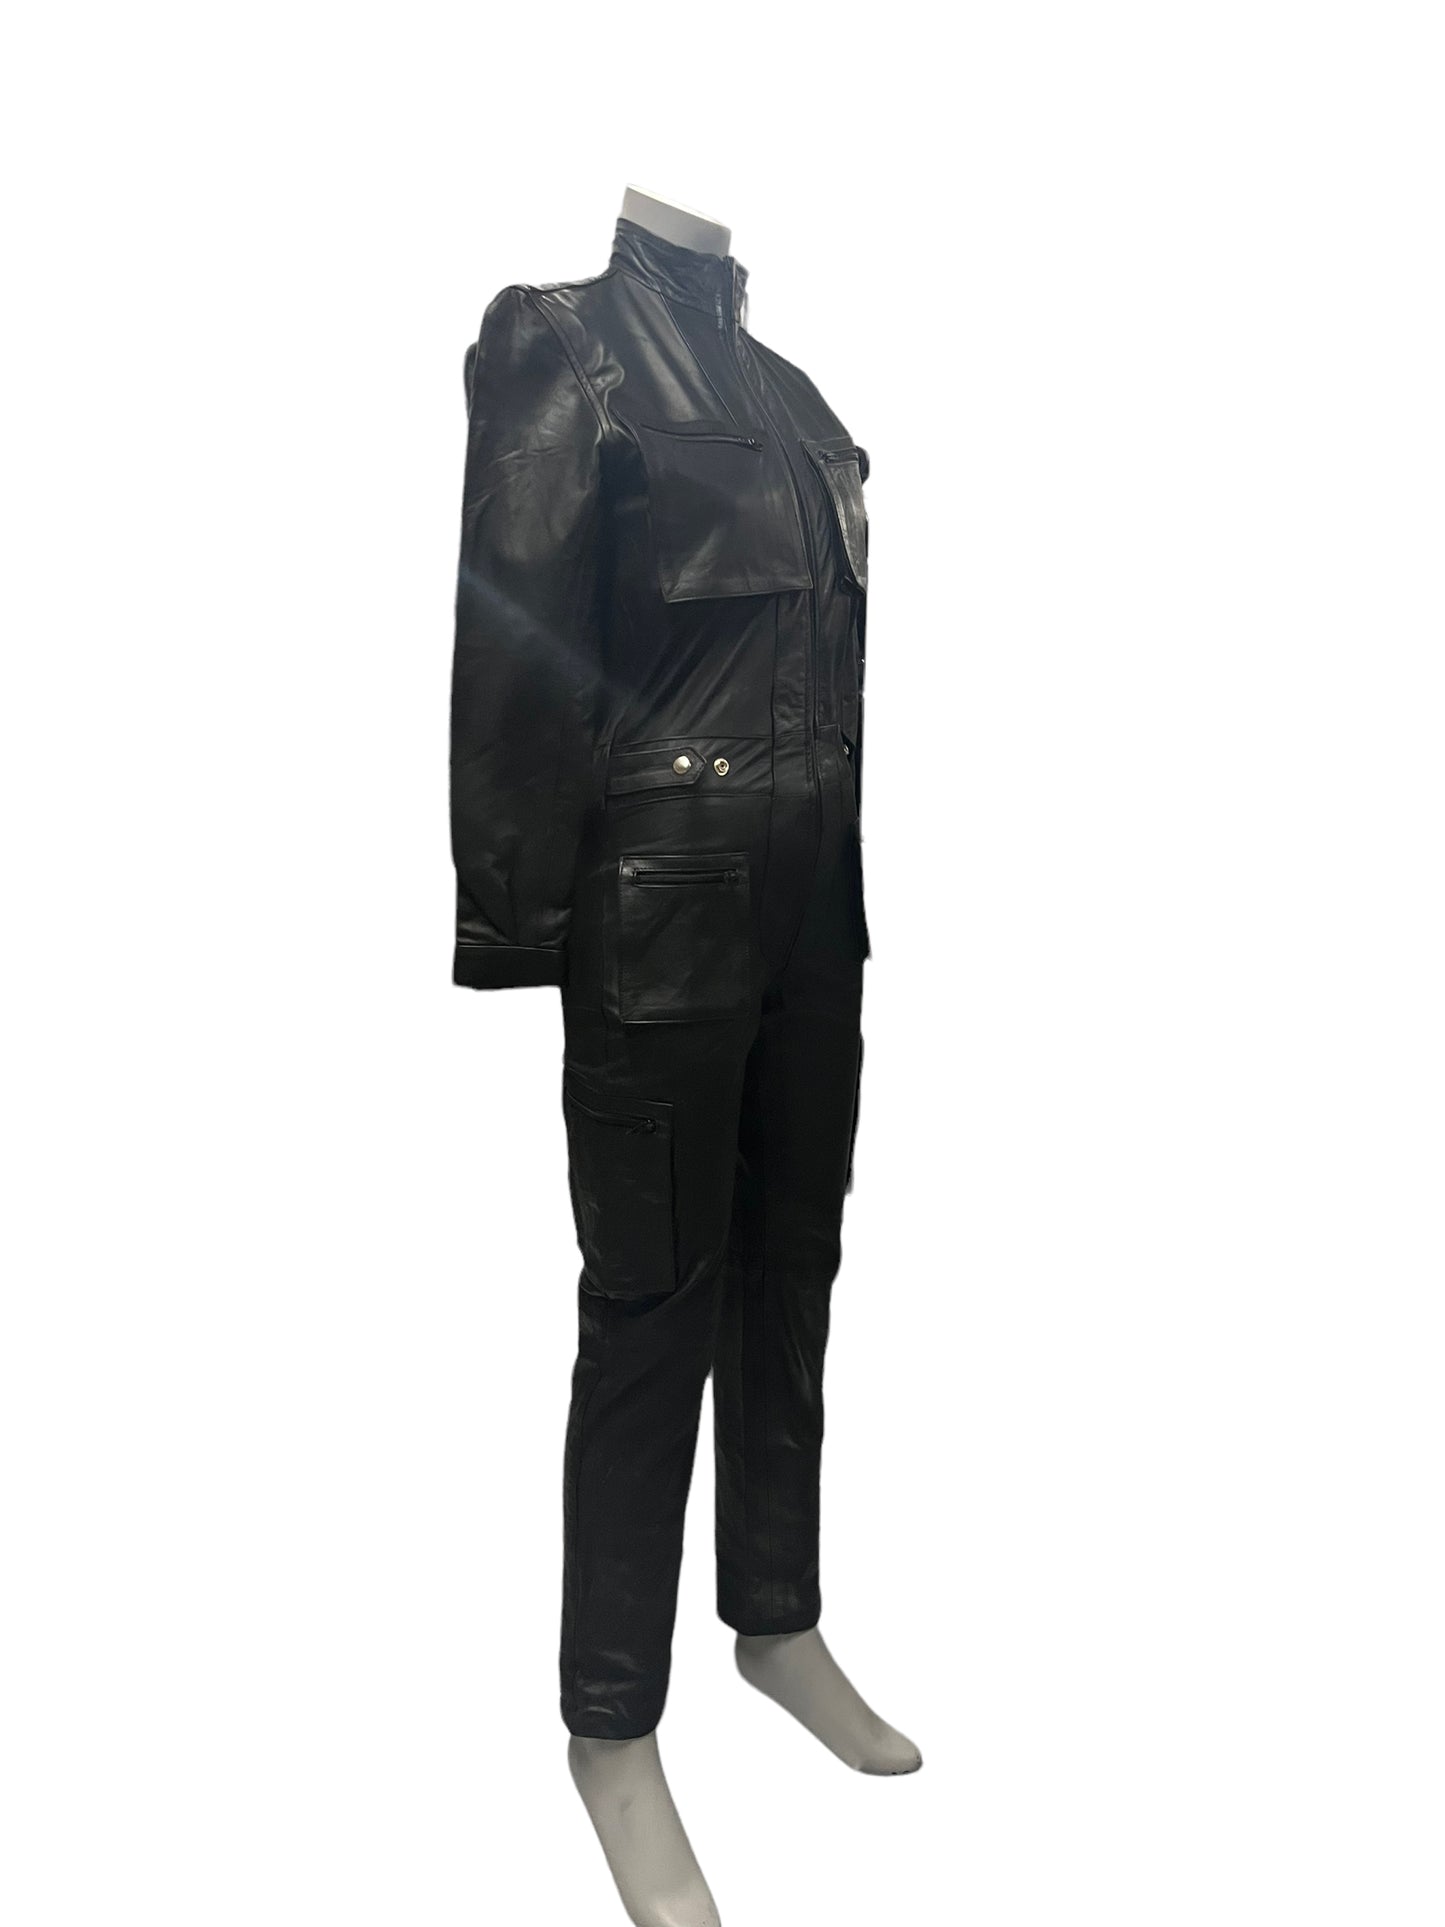 Fashion World - LL63 - Leather Suit - Size S